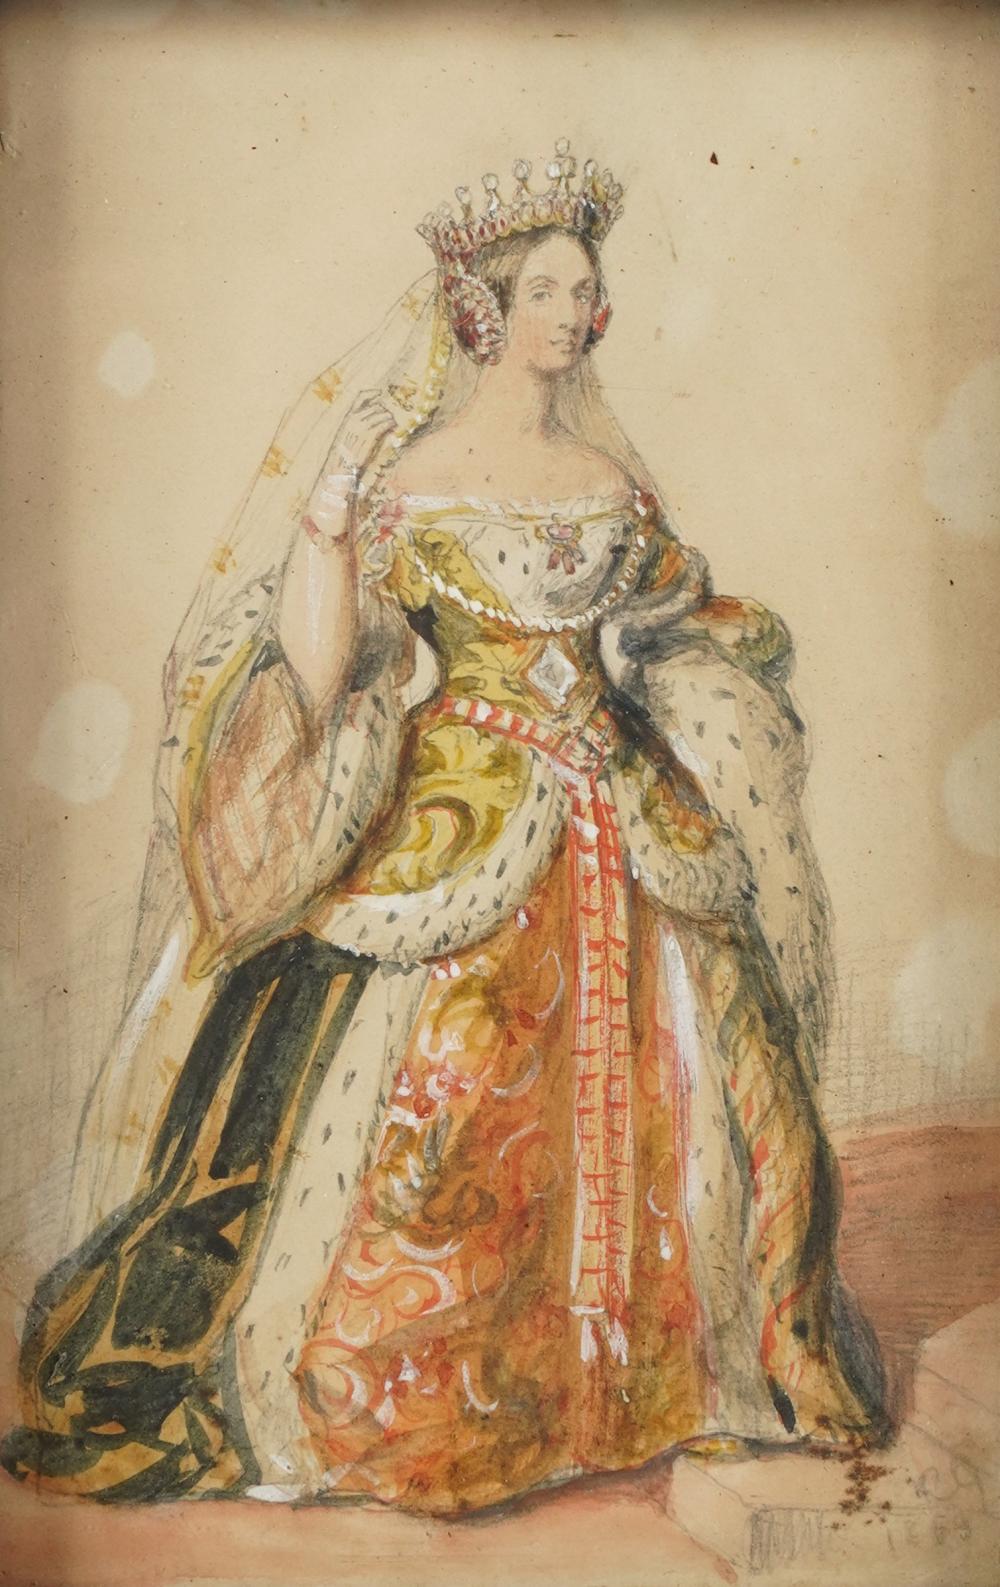 19TH CENTURY: PORTRAIT OF A QUEEN19th